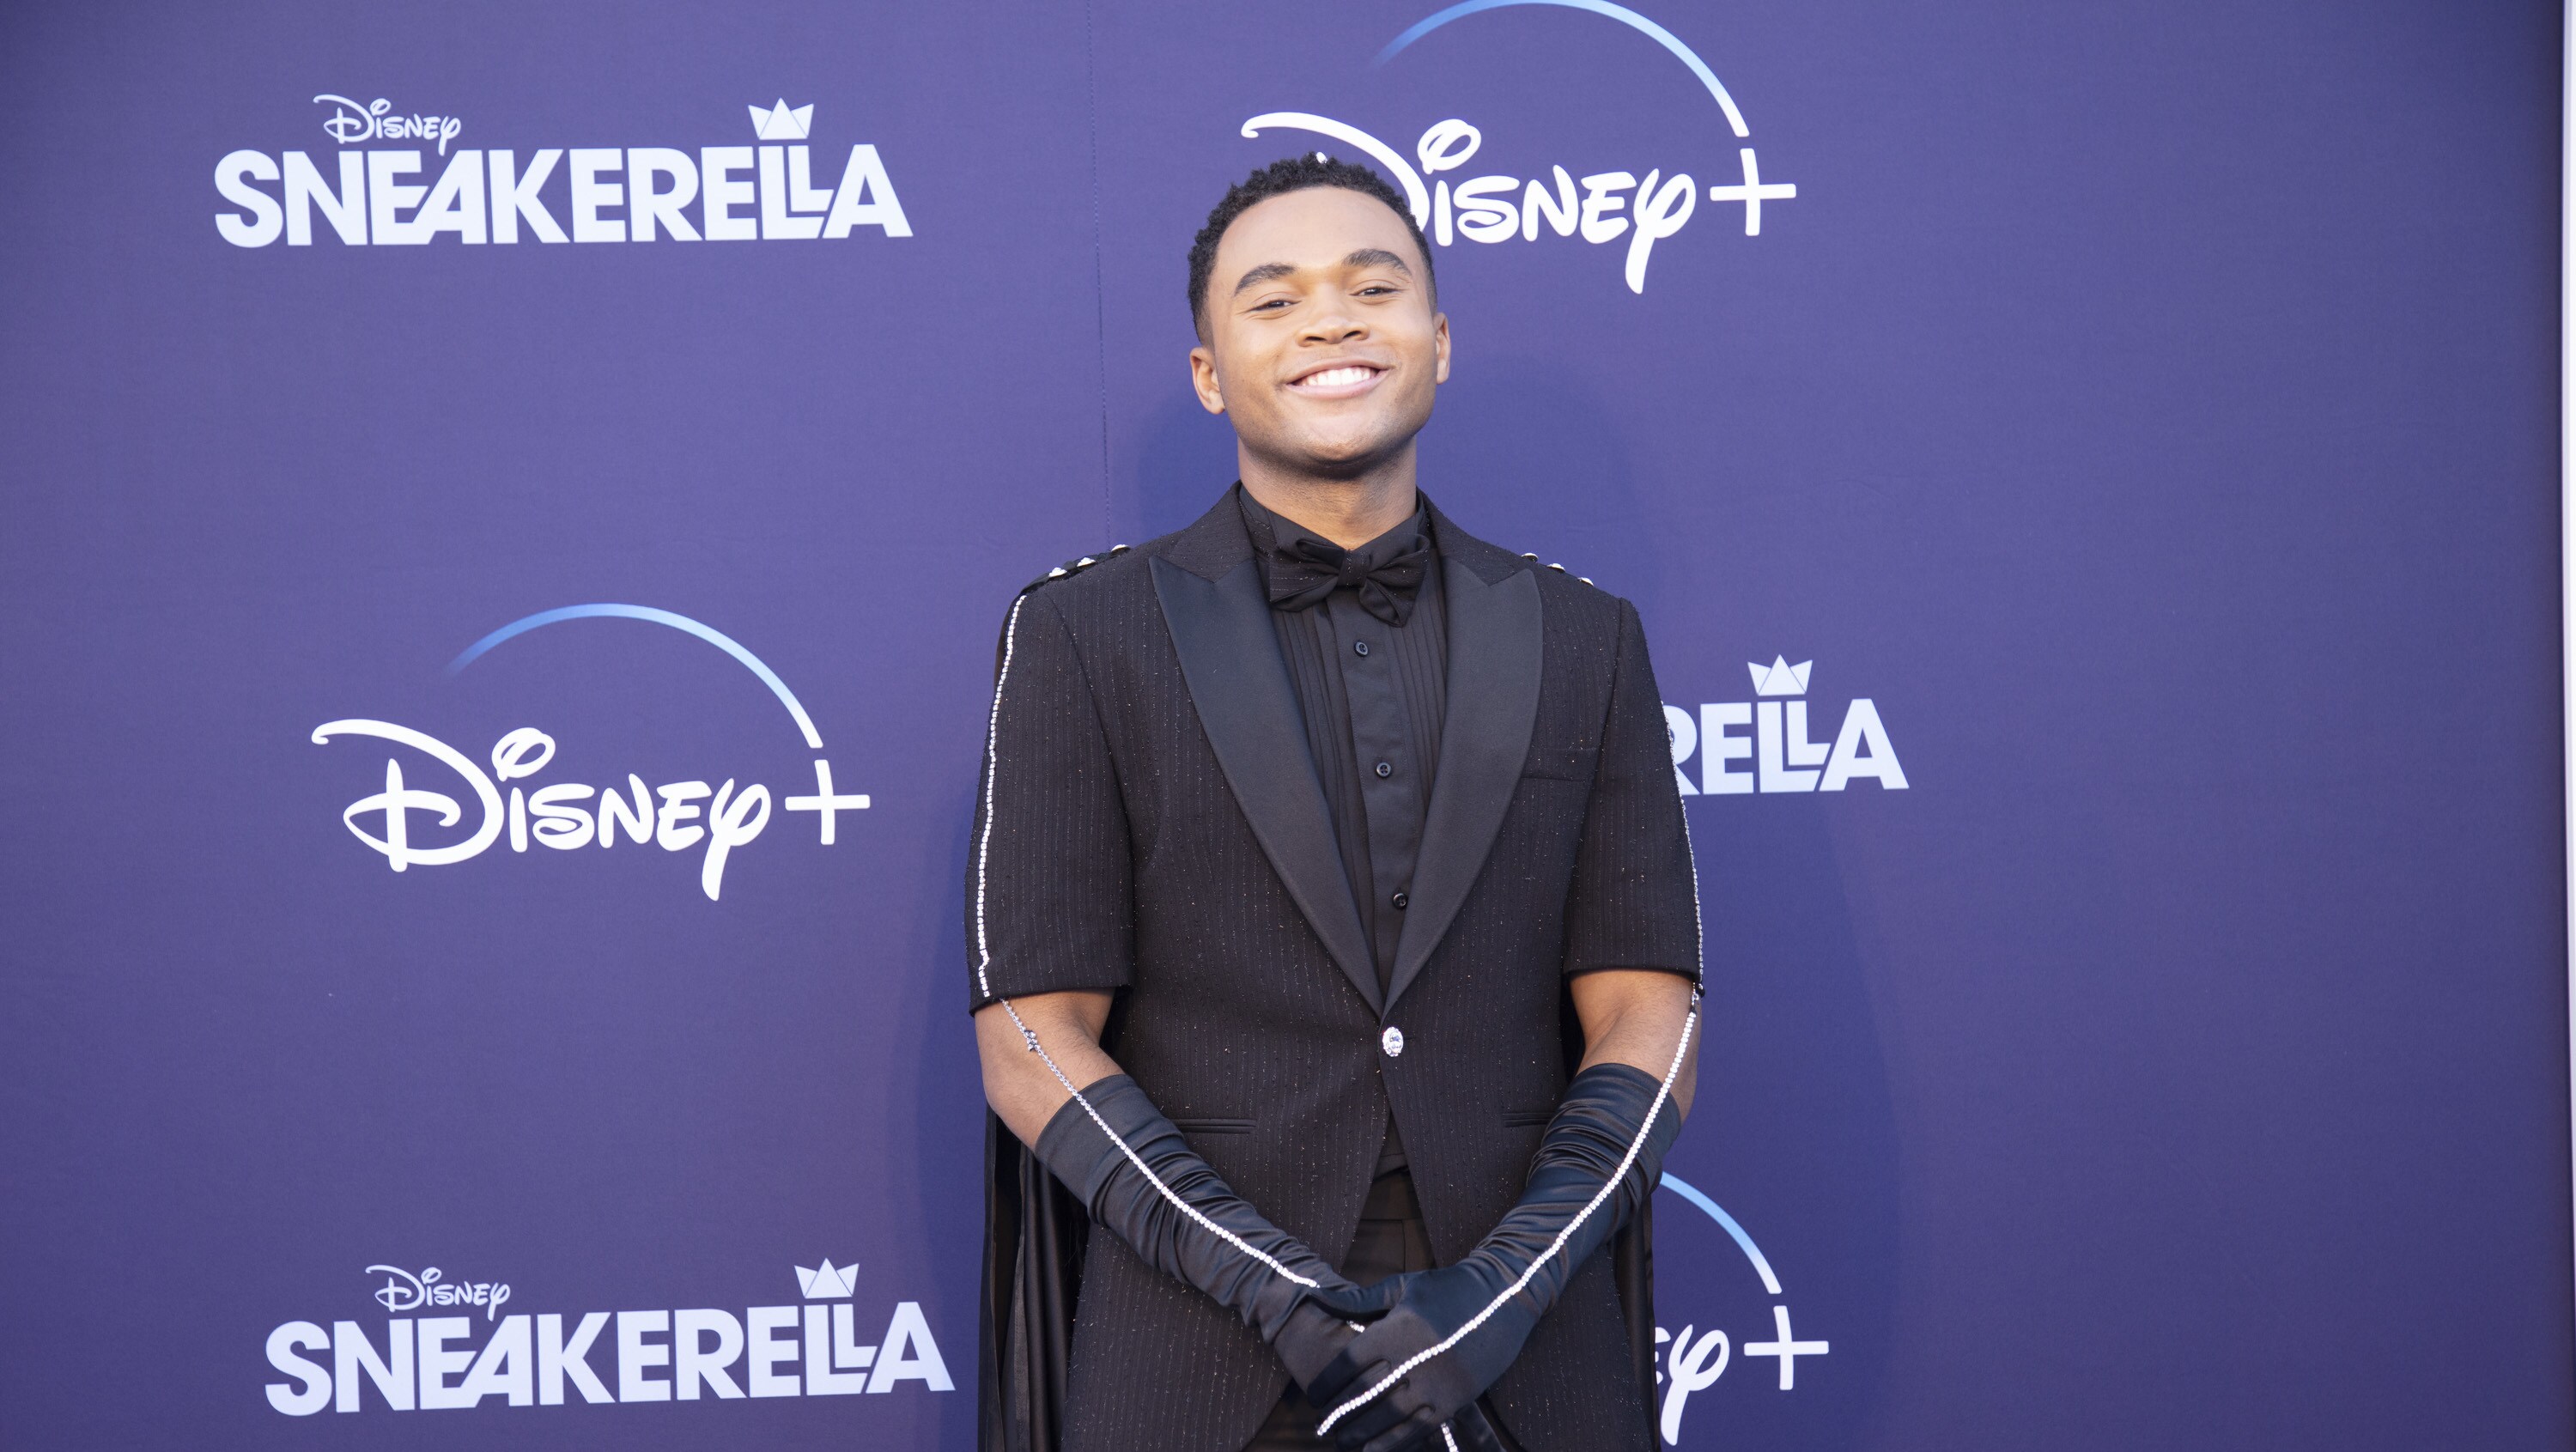 “SNEAKERELLA” RED CARPET PREMIERE EVENT - Stars attend the red carpet premiere of the upcoming music-driven Disney+ Original Movie “Sneakerella” at Pier 17 in New York City on Wednesday, Mary 11. The film begins streaming Friday, May 13, exclusively on Disney+. (Disney/John Manno) CHOSEN JACOBS